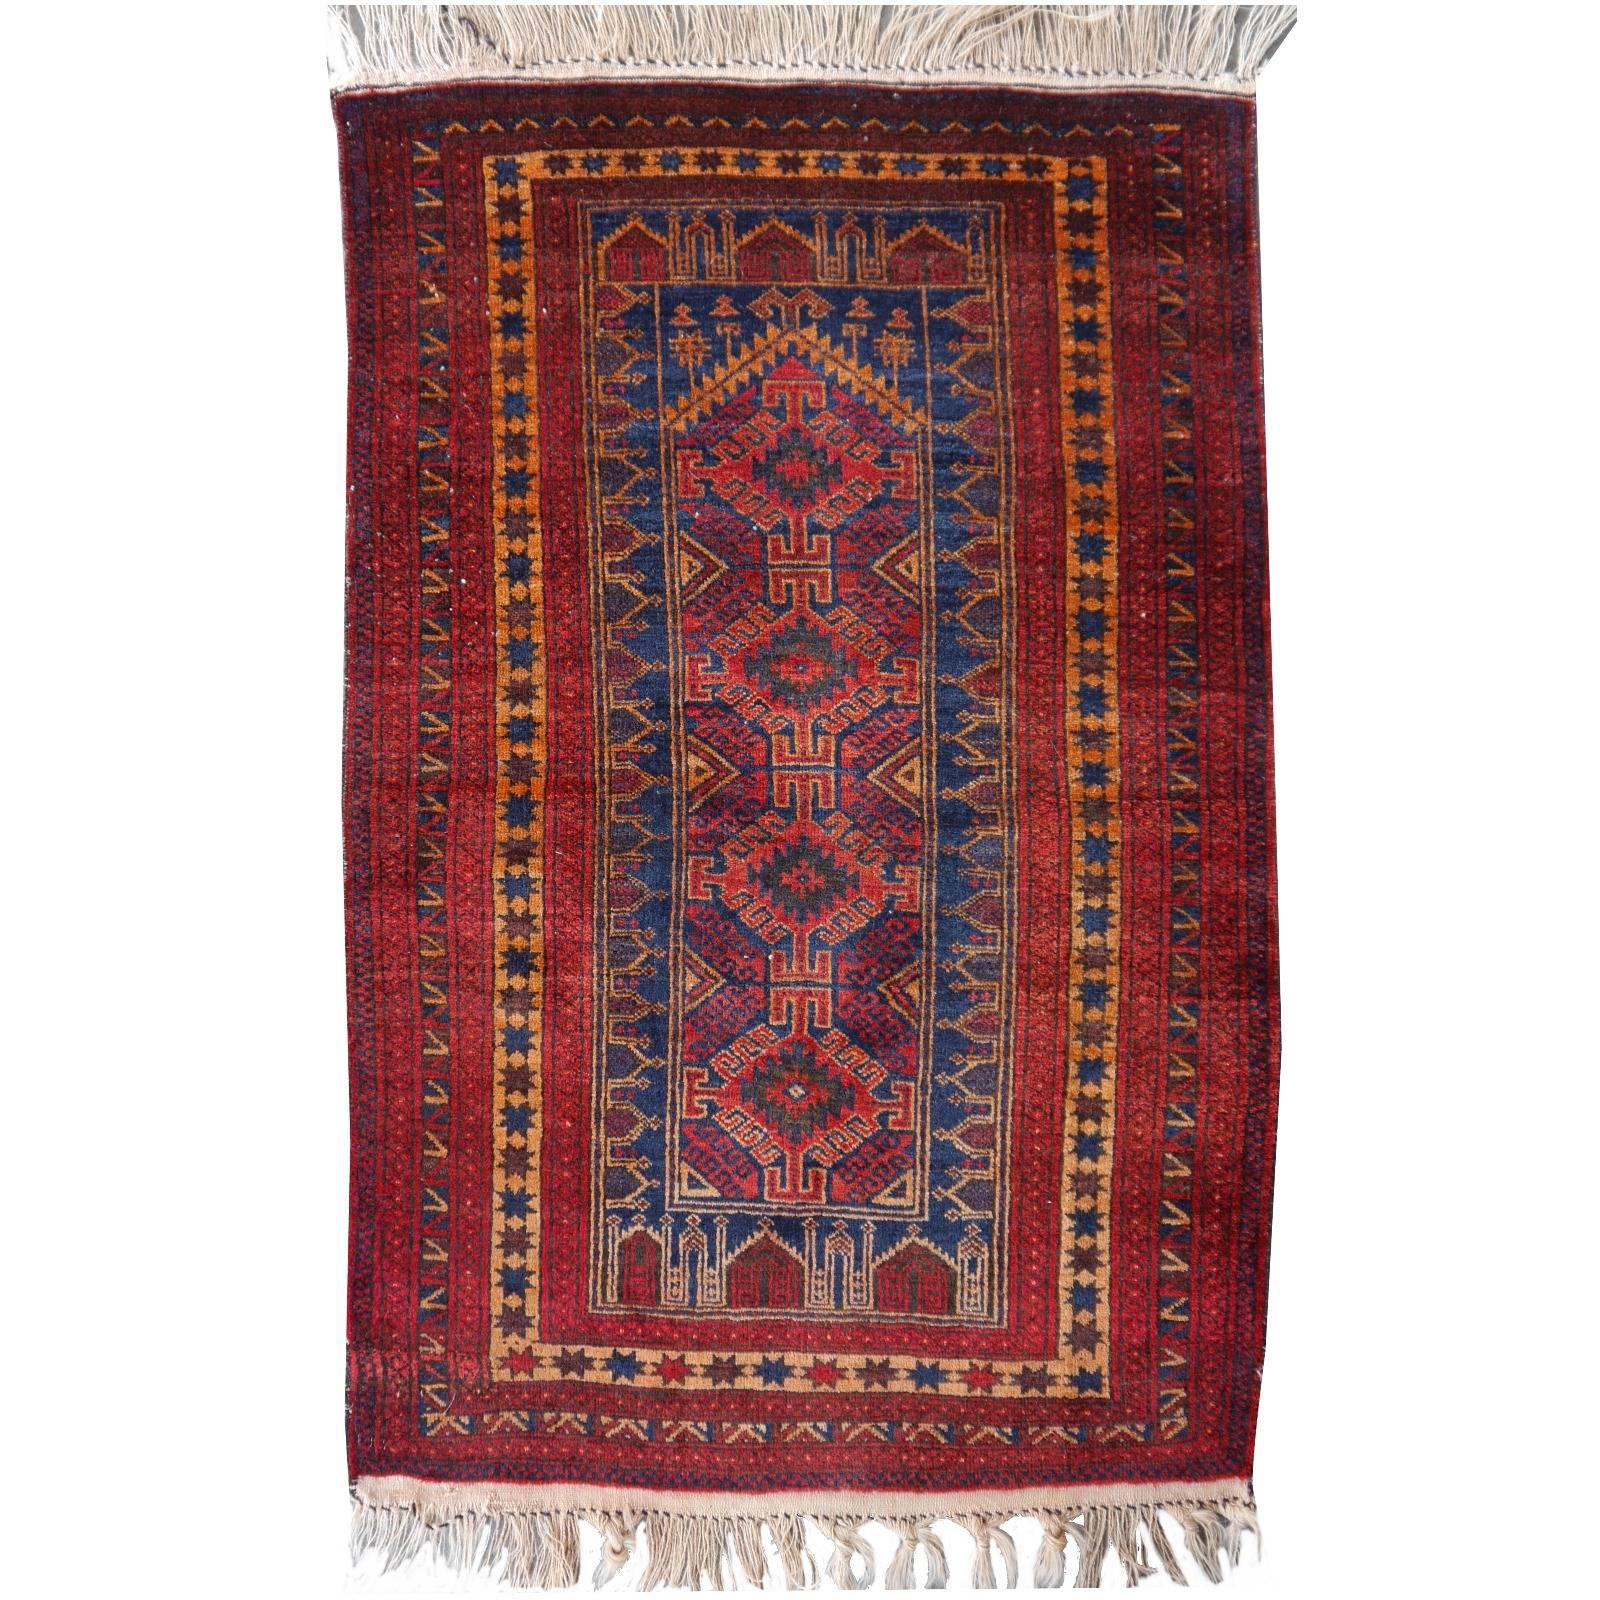 Vintage Balouch Tribal Prayer Rug Blue and Rust Color